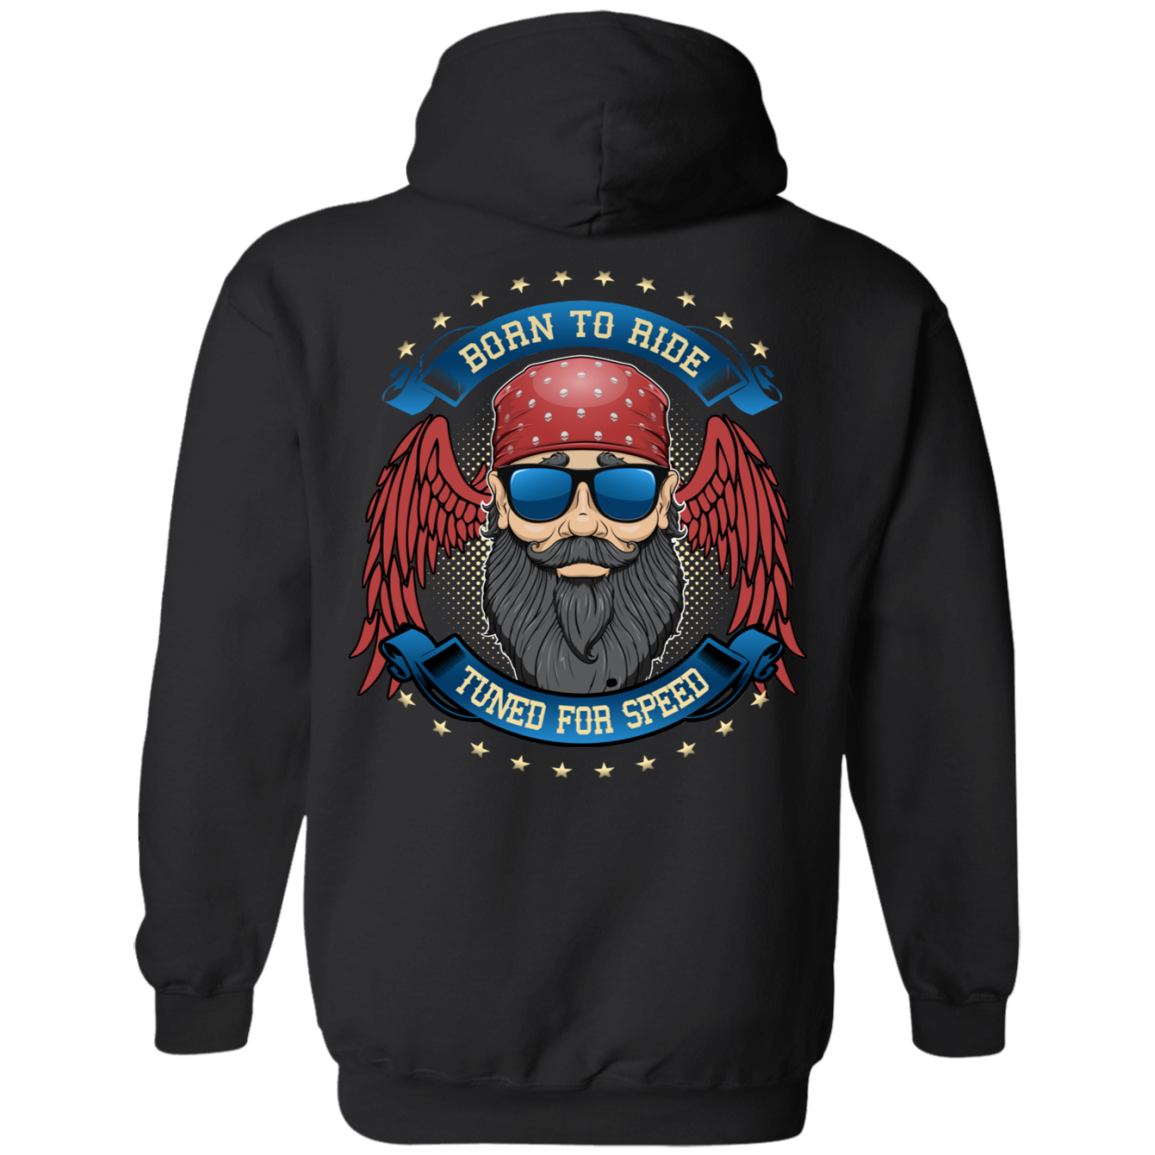 Men's "Born To Ride, Tuned For Speed" Hoodie